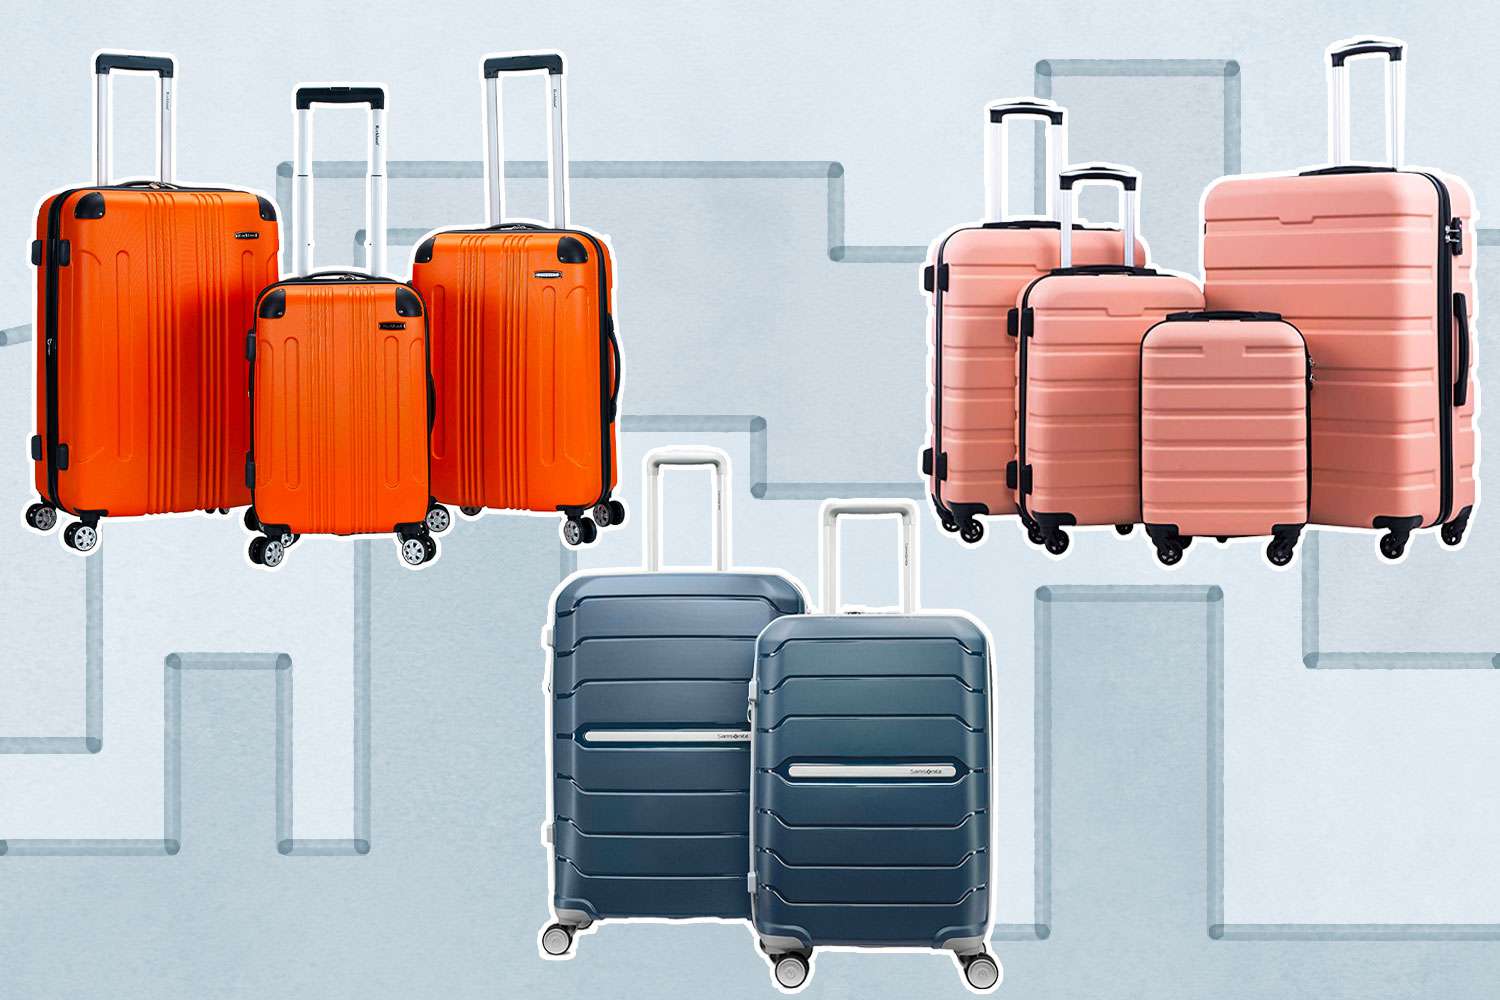 These 6 Traveler-loved Luggage Sets Are Up to 77% Off in Amazon’s Black Friday Sale